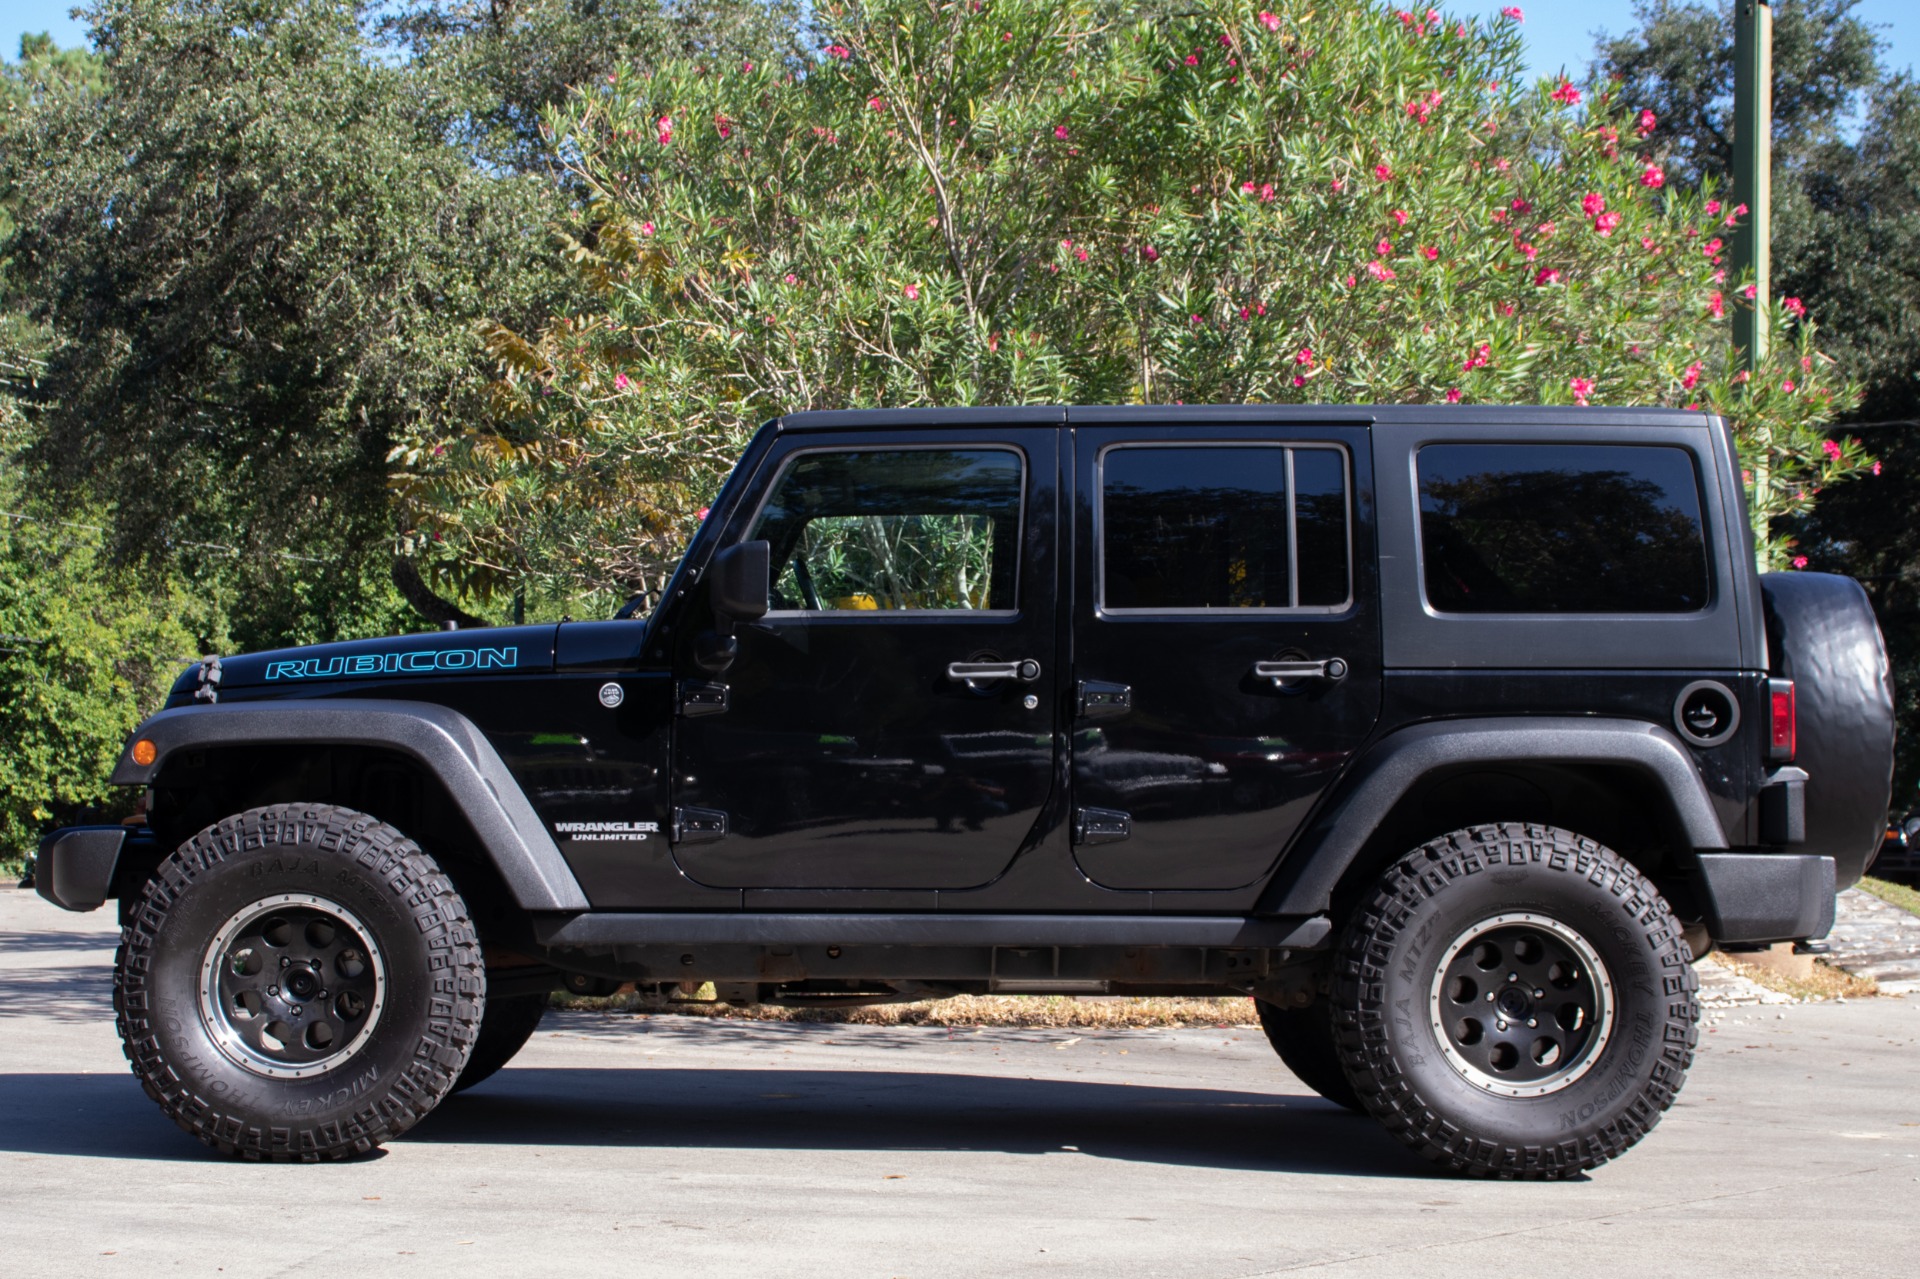 Used 2012 Jeep Wrangler Unlimited Rubicon For Sale